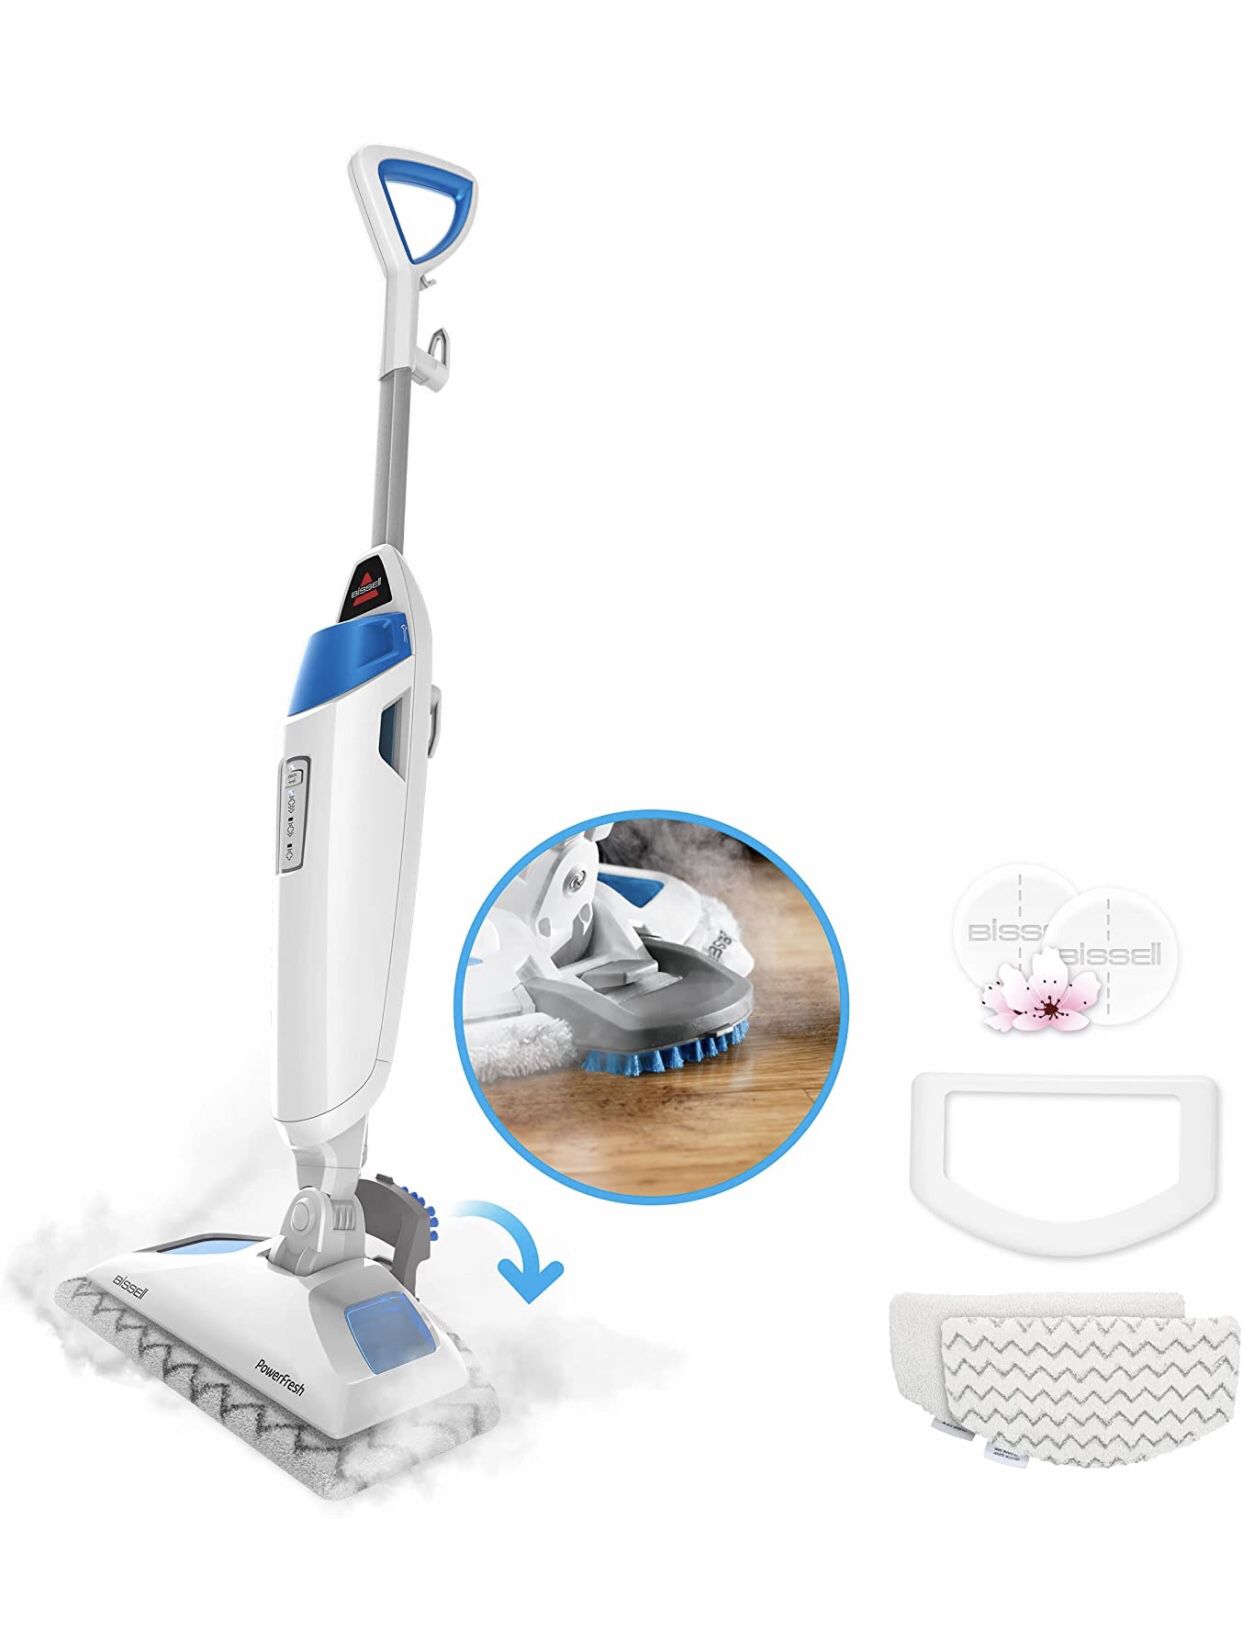 NEW! Bissell Power Fresh Steam Mop with Natural Sanitization, Floor Steamer, Tile Cleaner